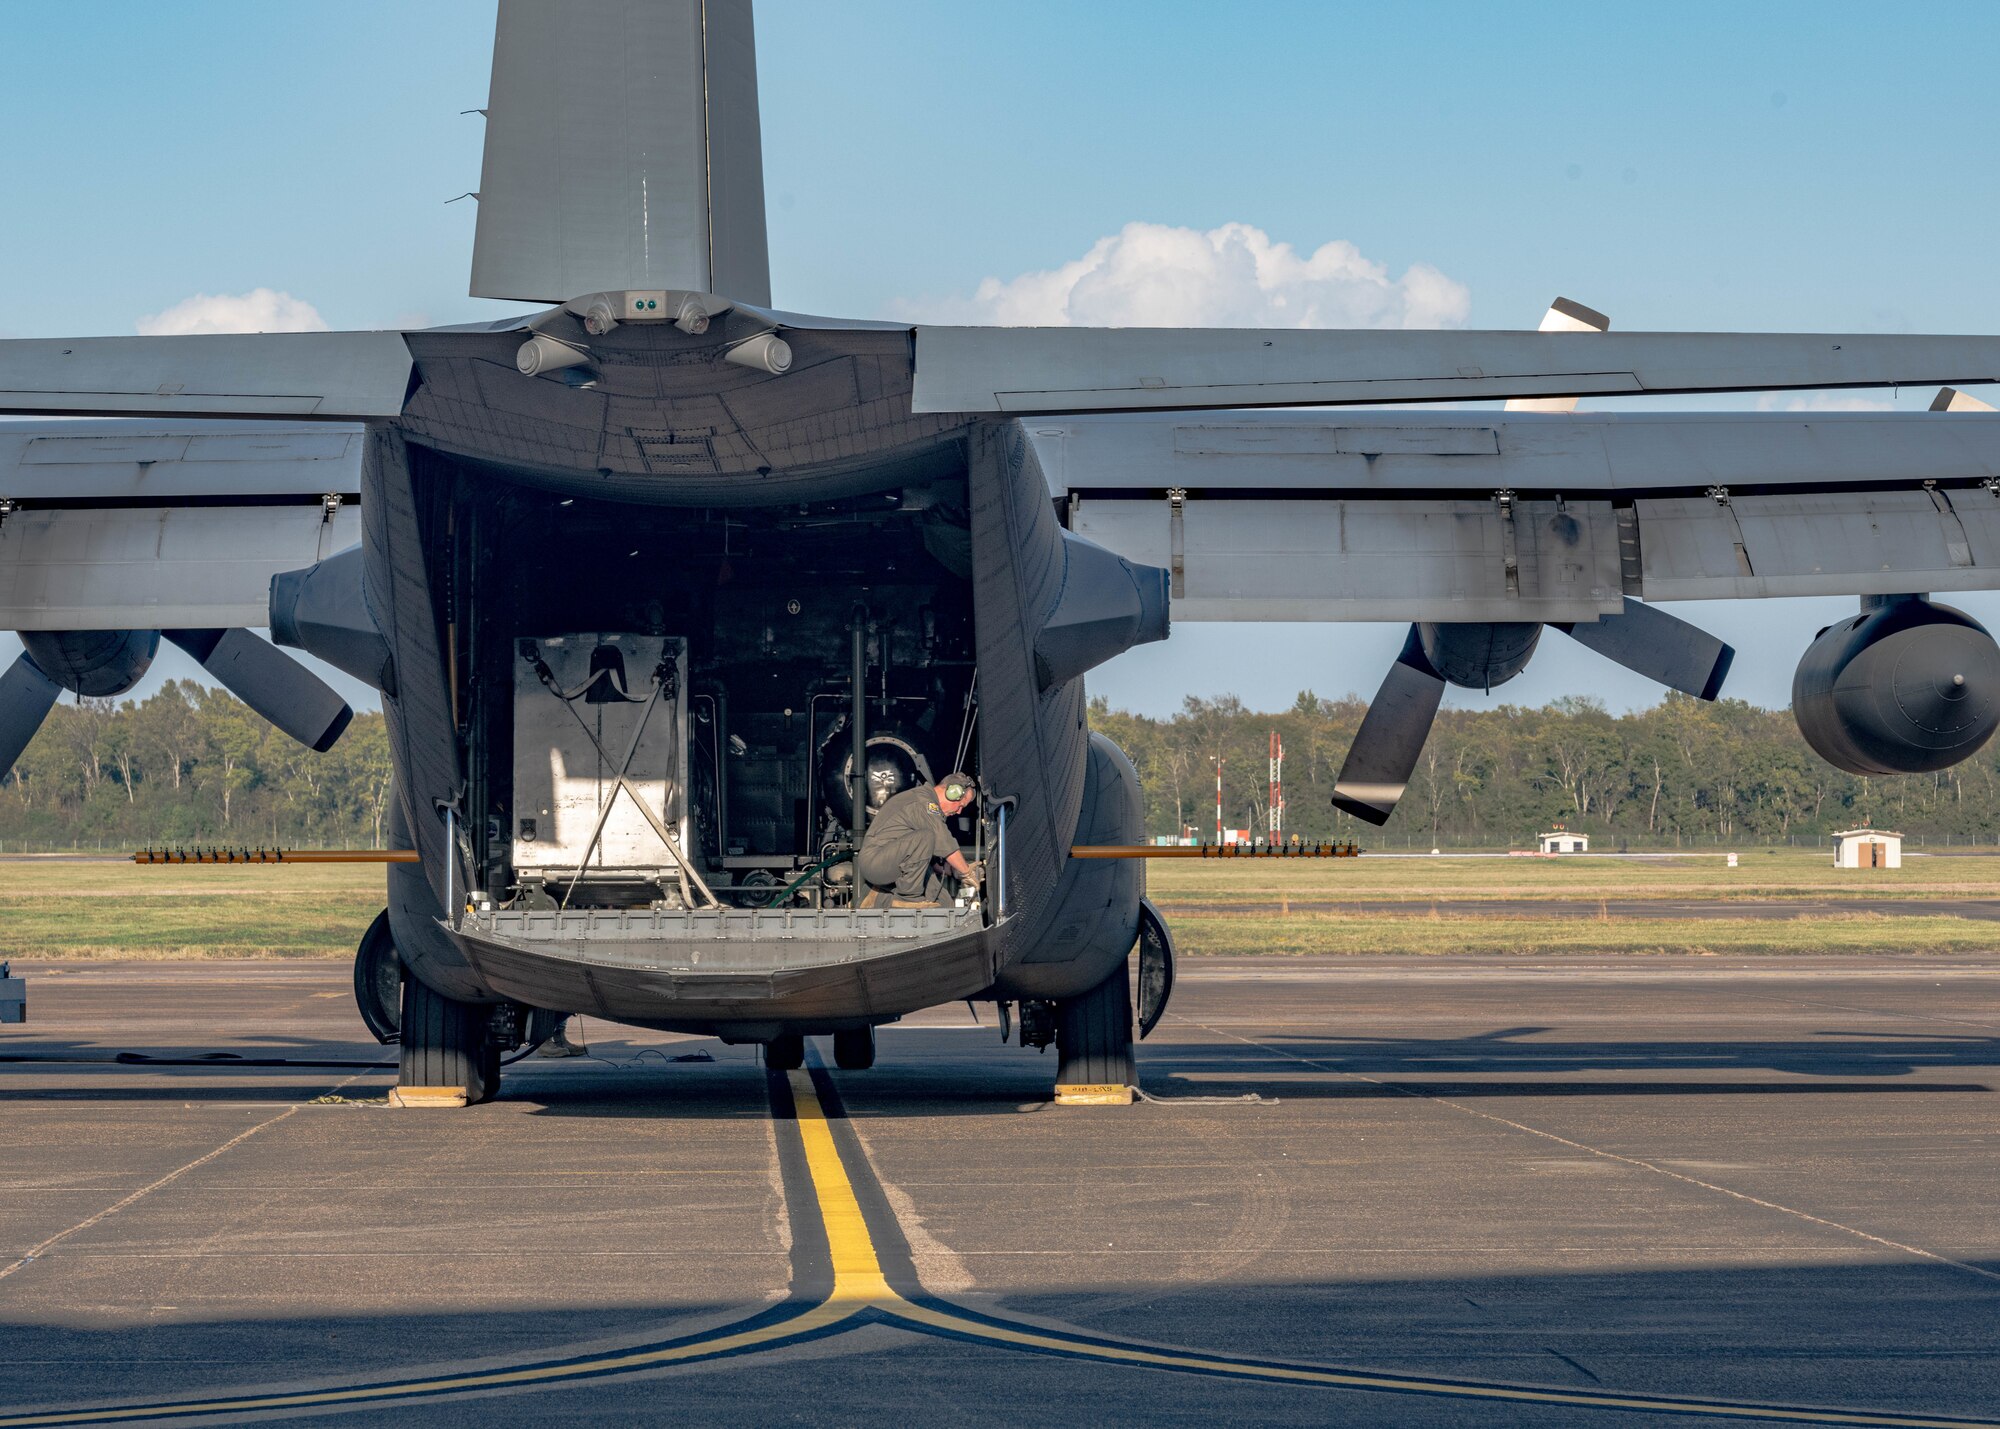 U.S. Air Force Reserve Senior Master Sgt. Mark Zickefoose, a loadmaster assigned to the 910th Operations Group, makes final adjustments on the cargo deck of a C-130H Hercules aircraft assigned to the 910th Airlift Wing, based at Youngstown Air Reserve Station, Ohio and equipped with a Modular Aerial Spray System, prior to take off from Barksdale Air Force Base, Louisiana, Oct. 22, 2020.